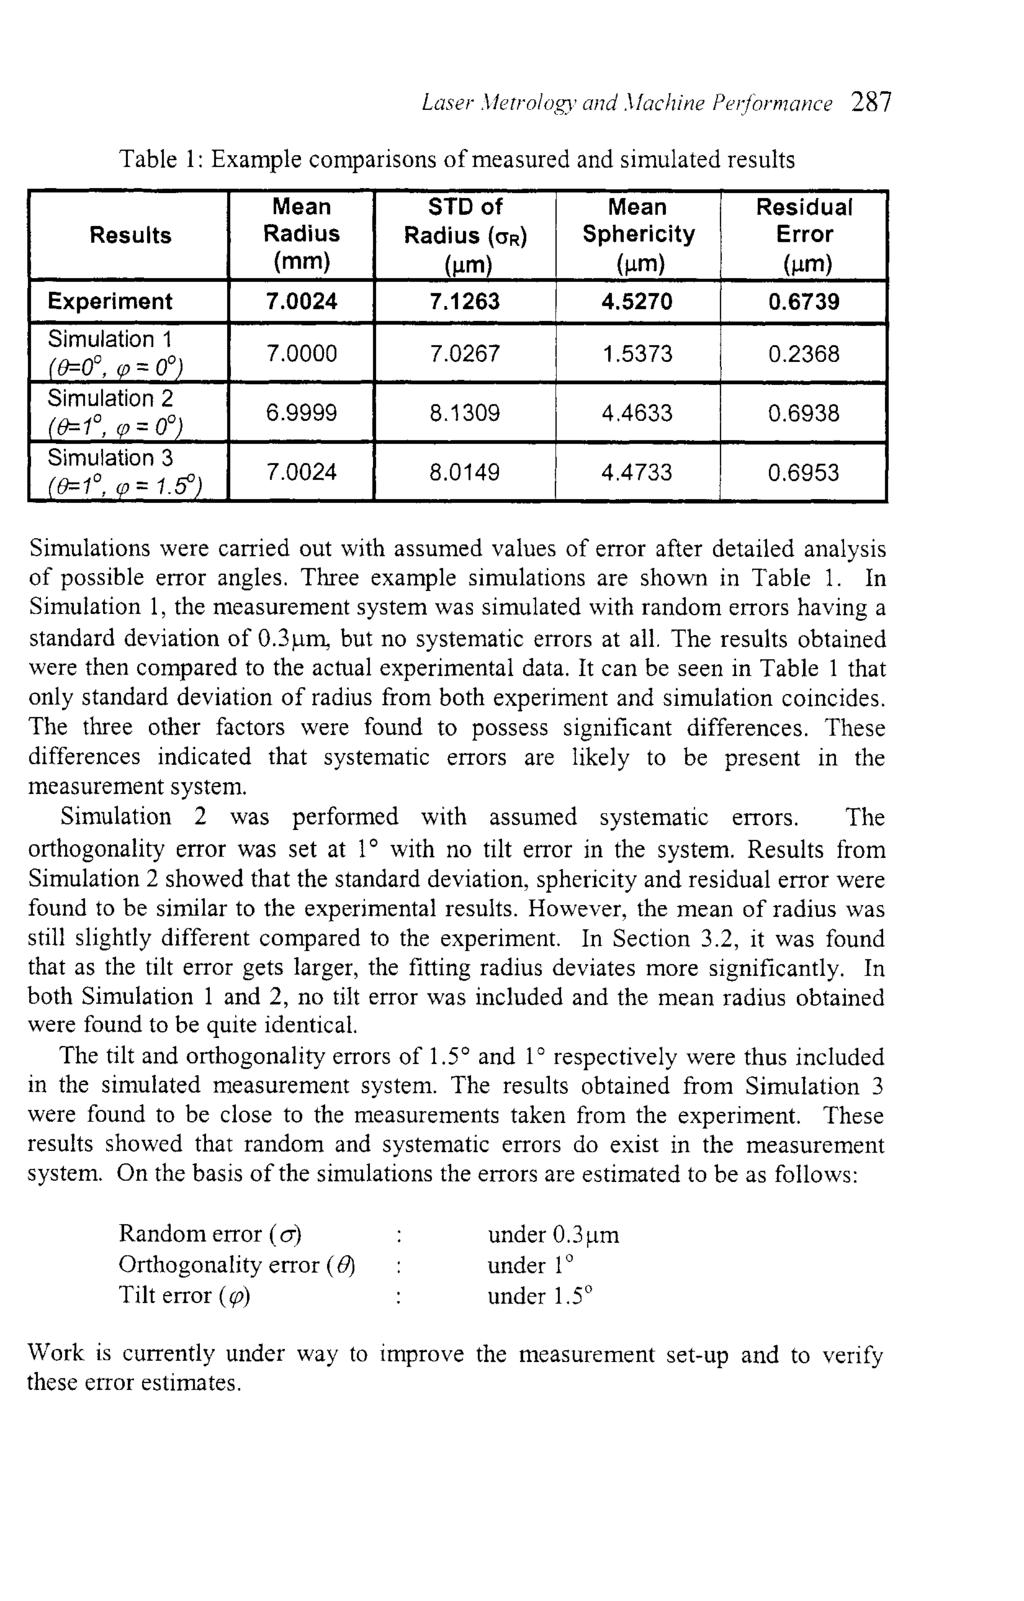 Table 1 : Example comparisons of measured and simulated results I I Mean I STD of ( Mean / Residual ( Results Experiment r 4 Simulation 1 Radius (mm) 7.0024 Radius (ar) (pm) 7.1263 Sphericity (pm) 4.